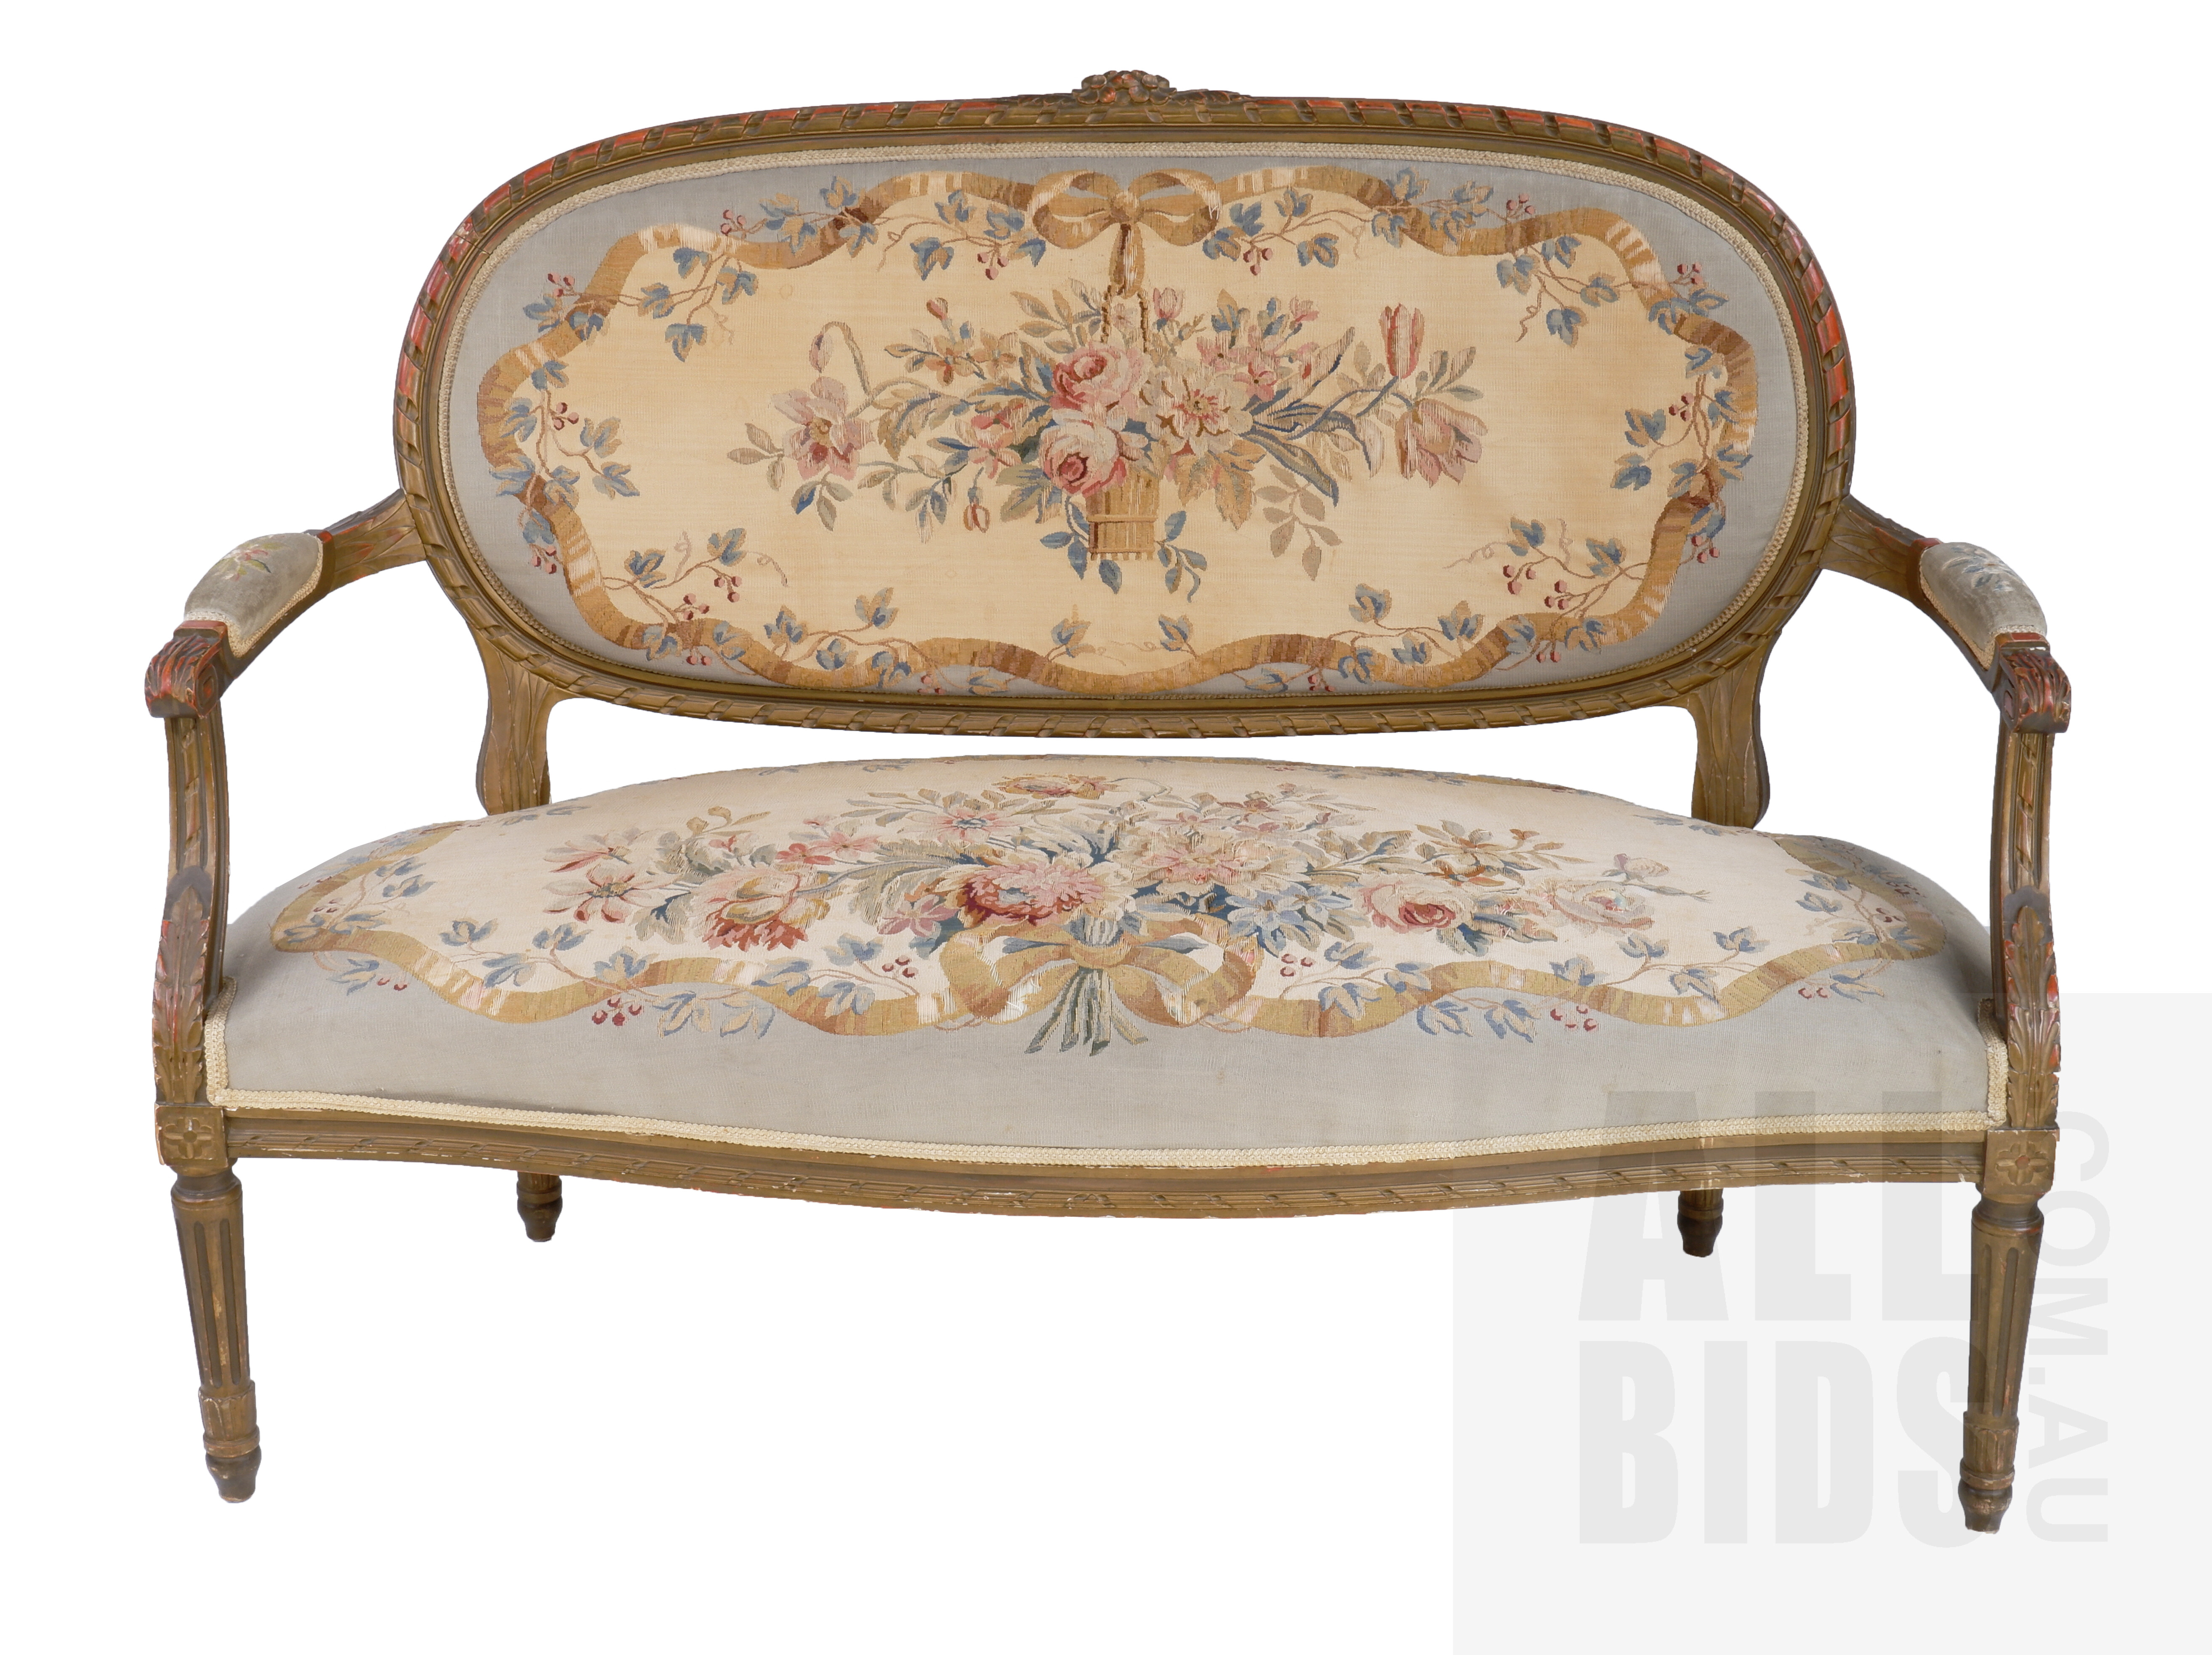 'Antique French Carved Giltwood Louis XV Style Settee with Original Tapestry Upholstery, Late 19th Century'